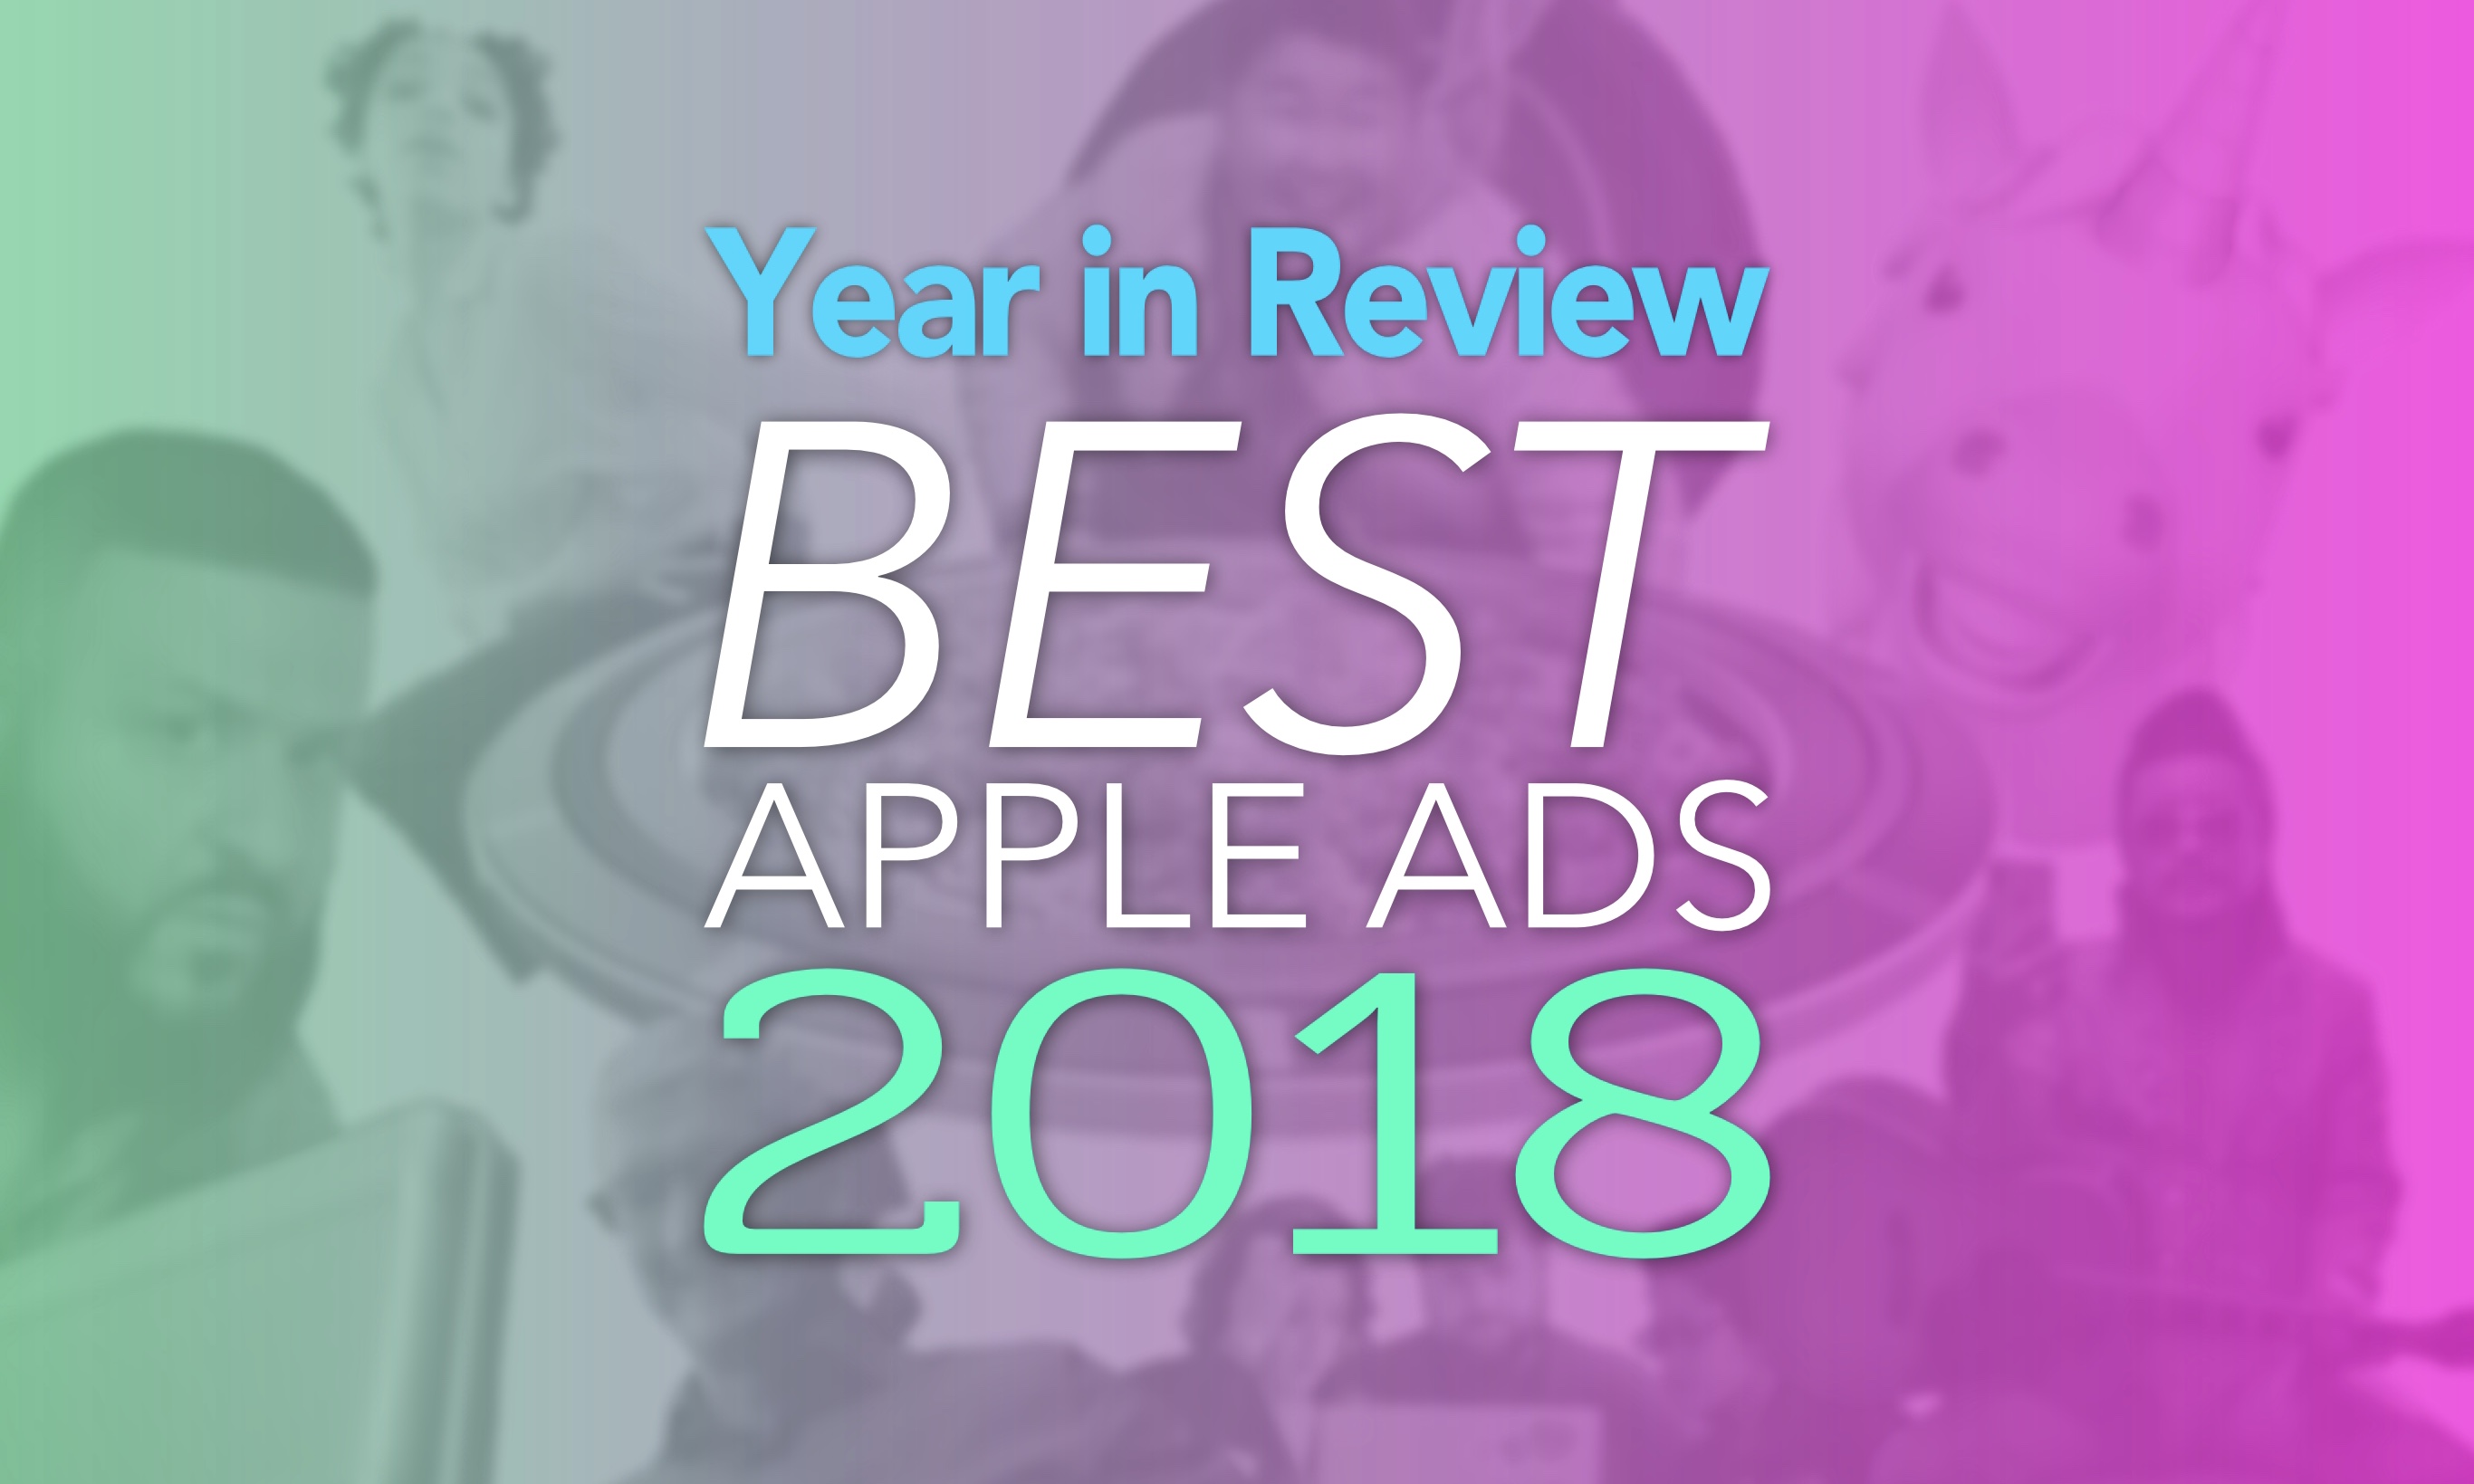 Year in Review Best Apple ads 2018